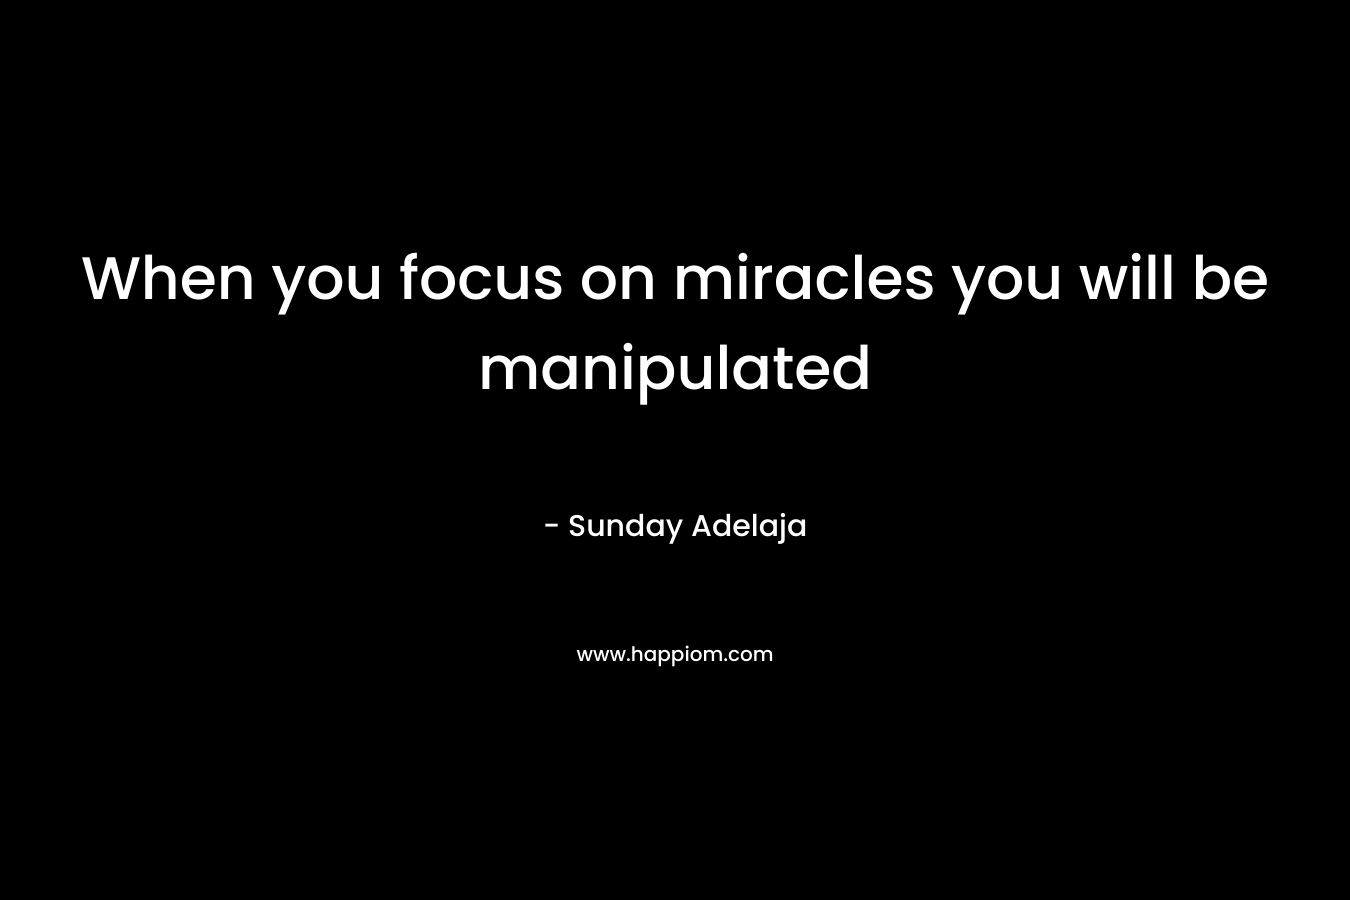 When you focus on miracles you will be manipulated